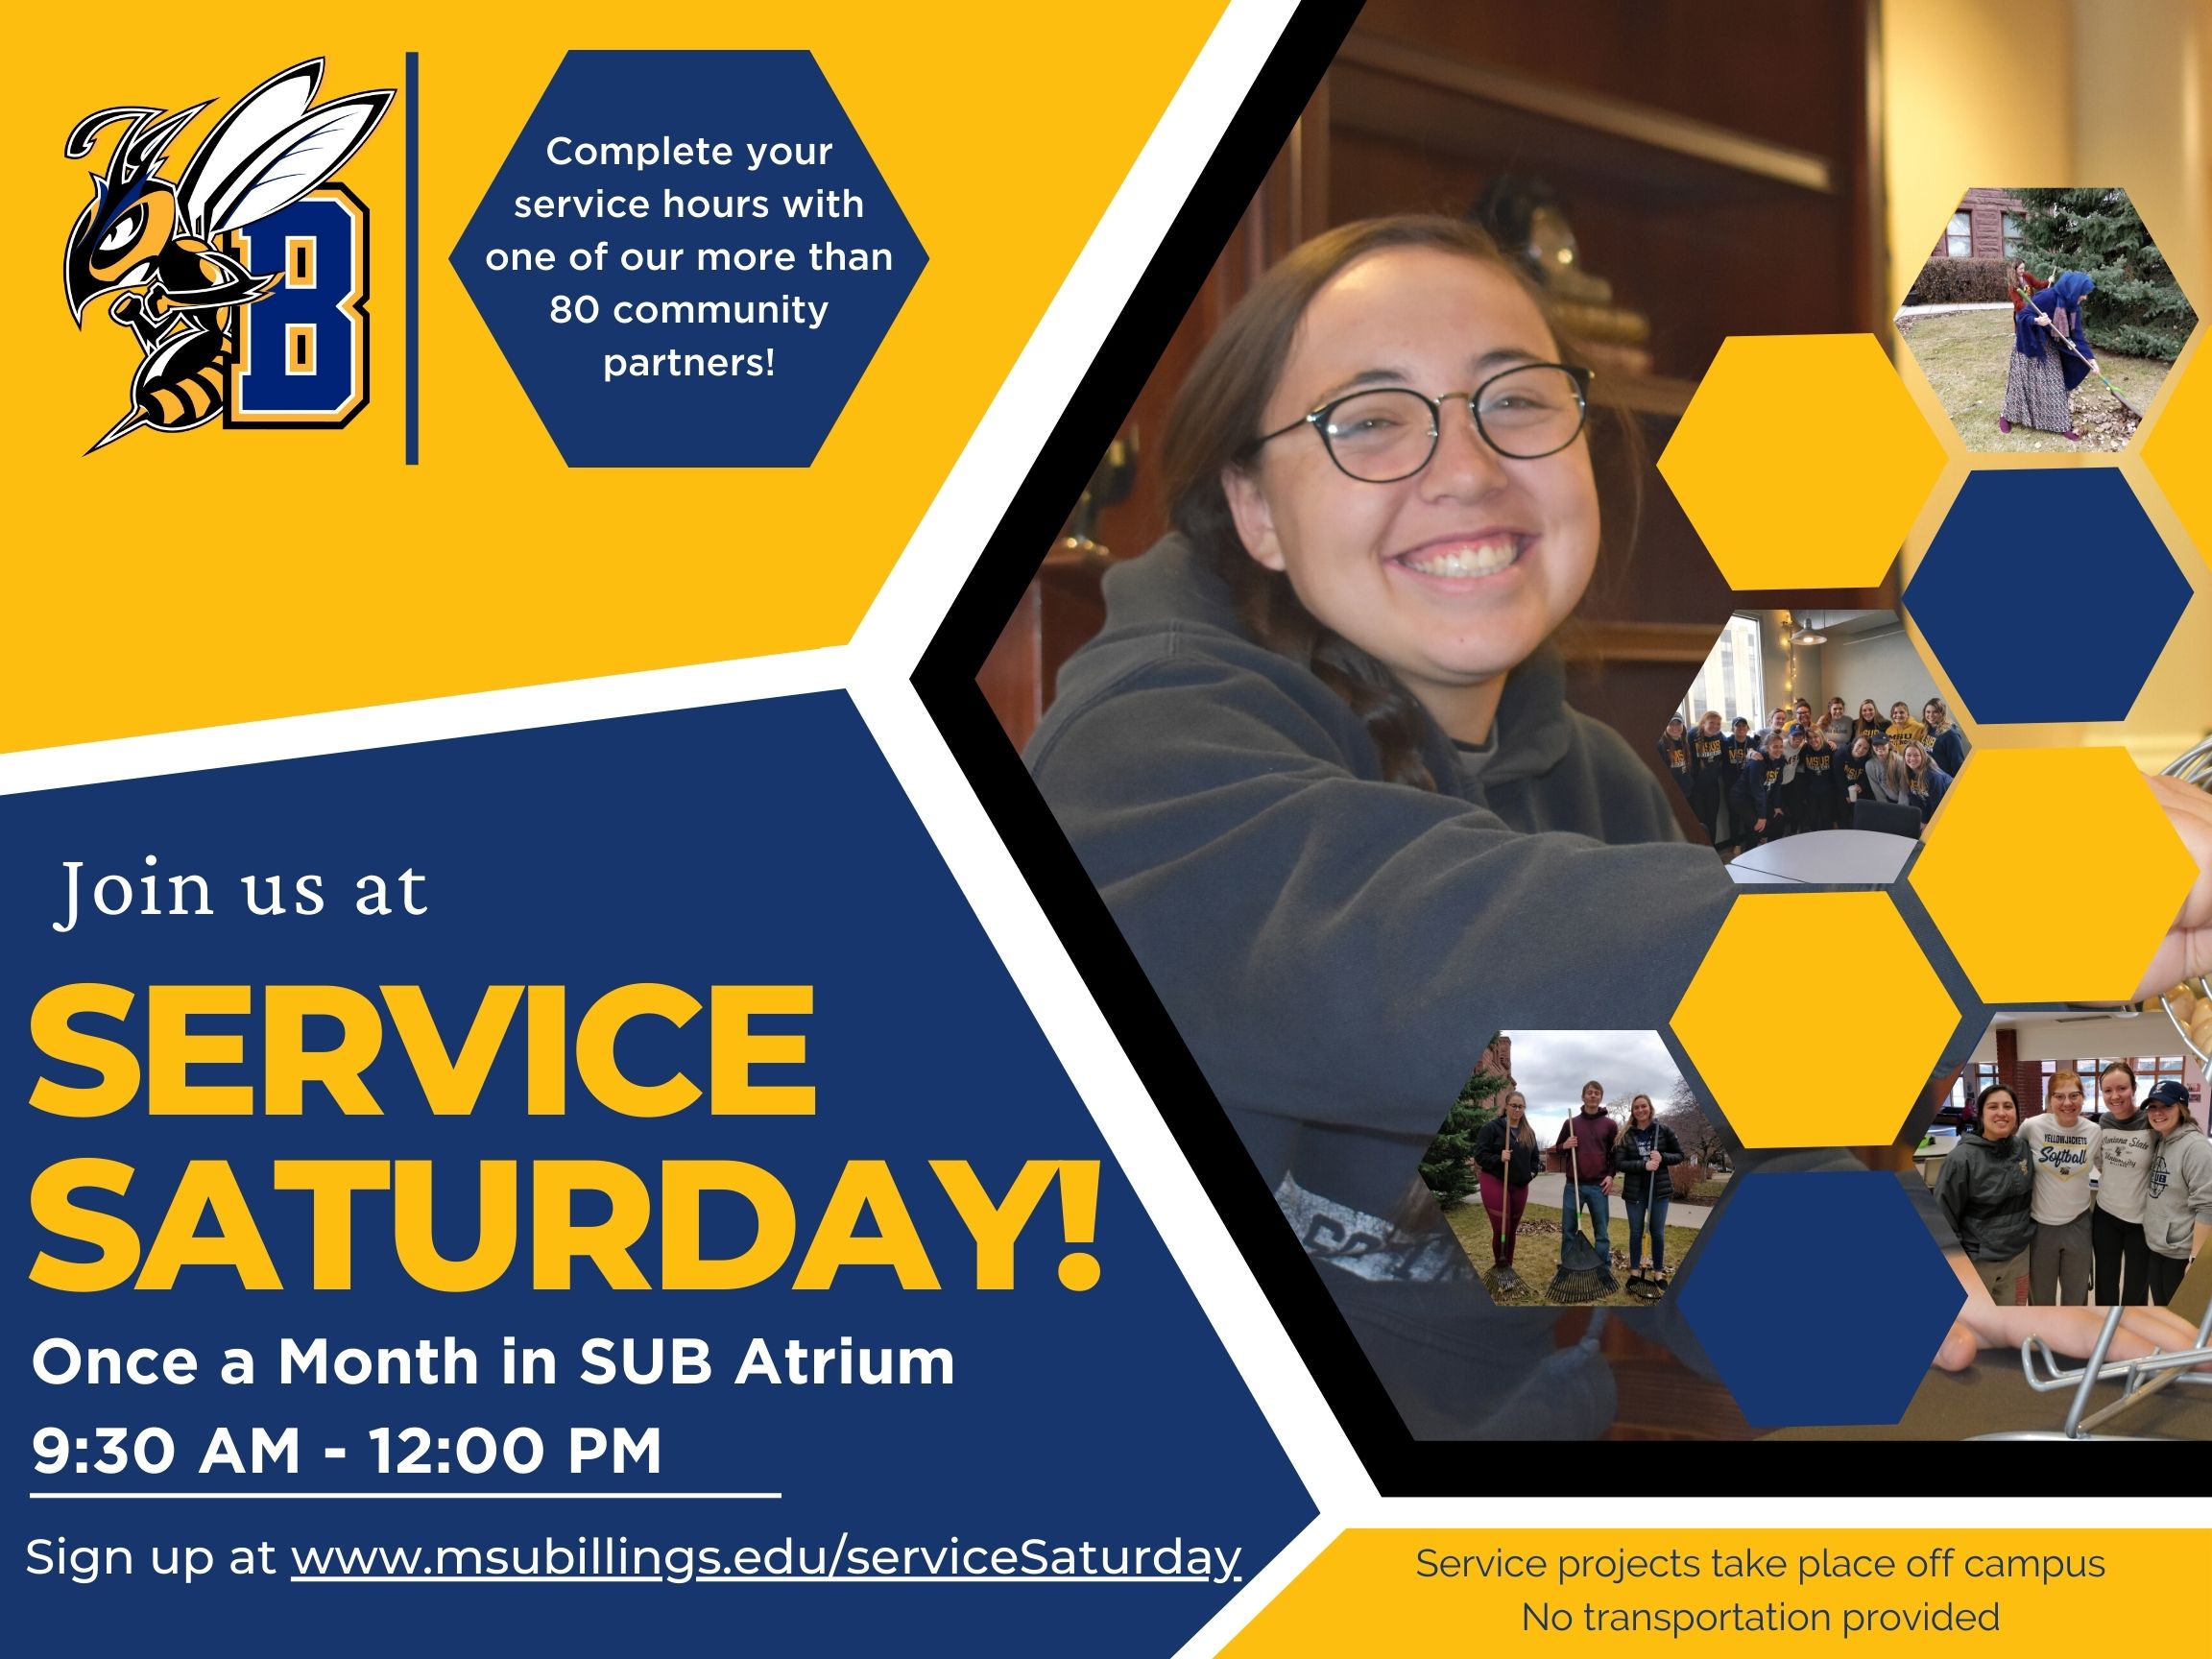 Join us at Service Saturday. Once a month in SUB Atrium 9:30 12:00. Com plete your service hours with one of our more than 80 community partners